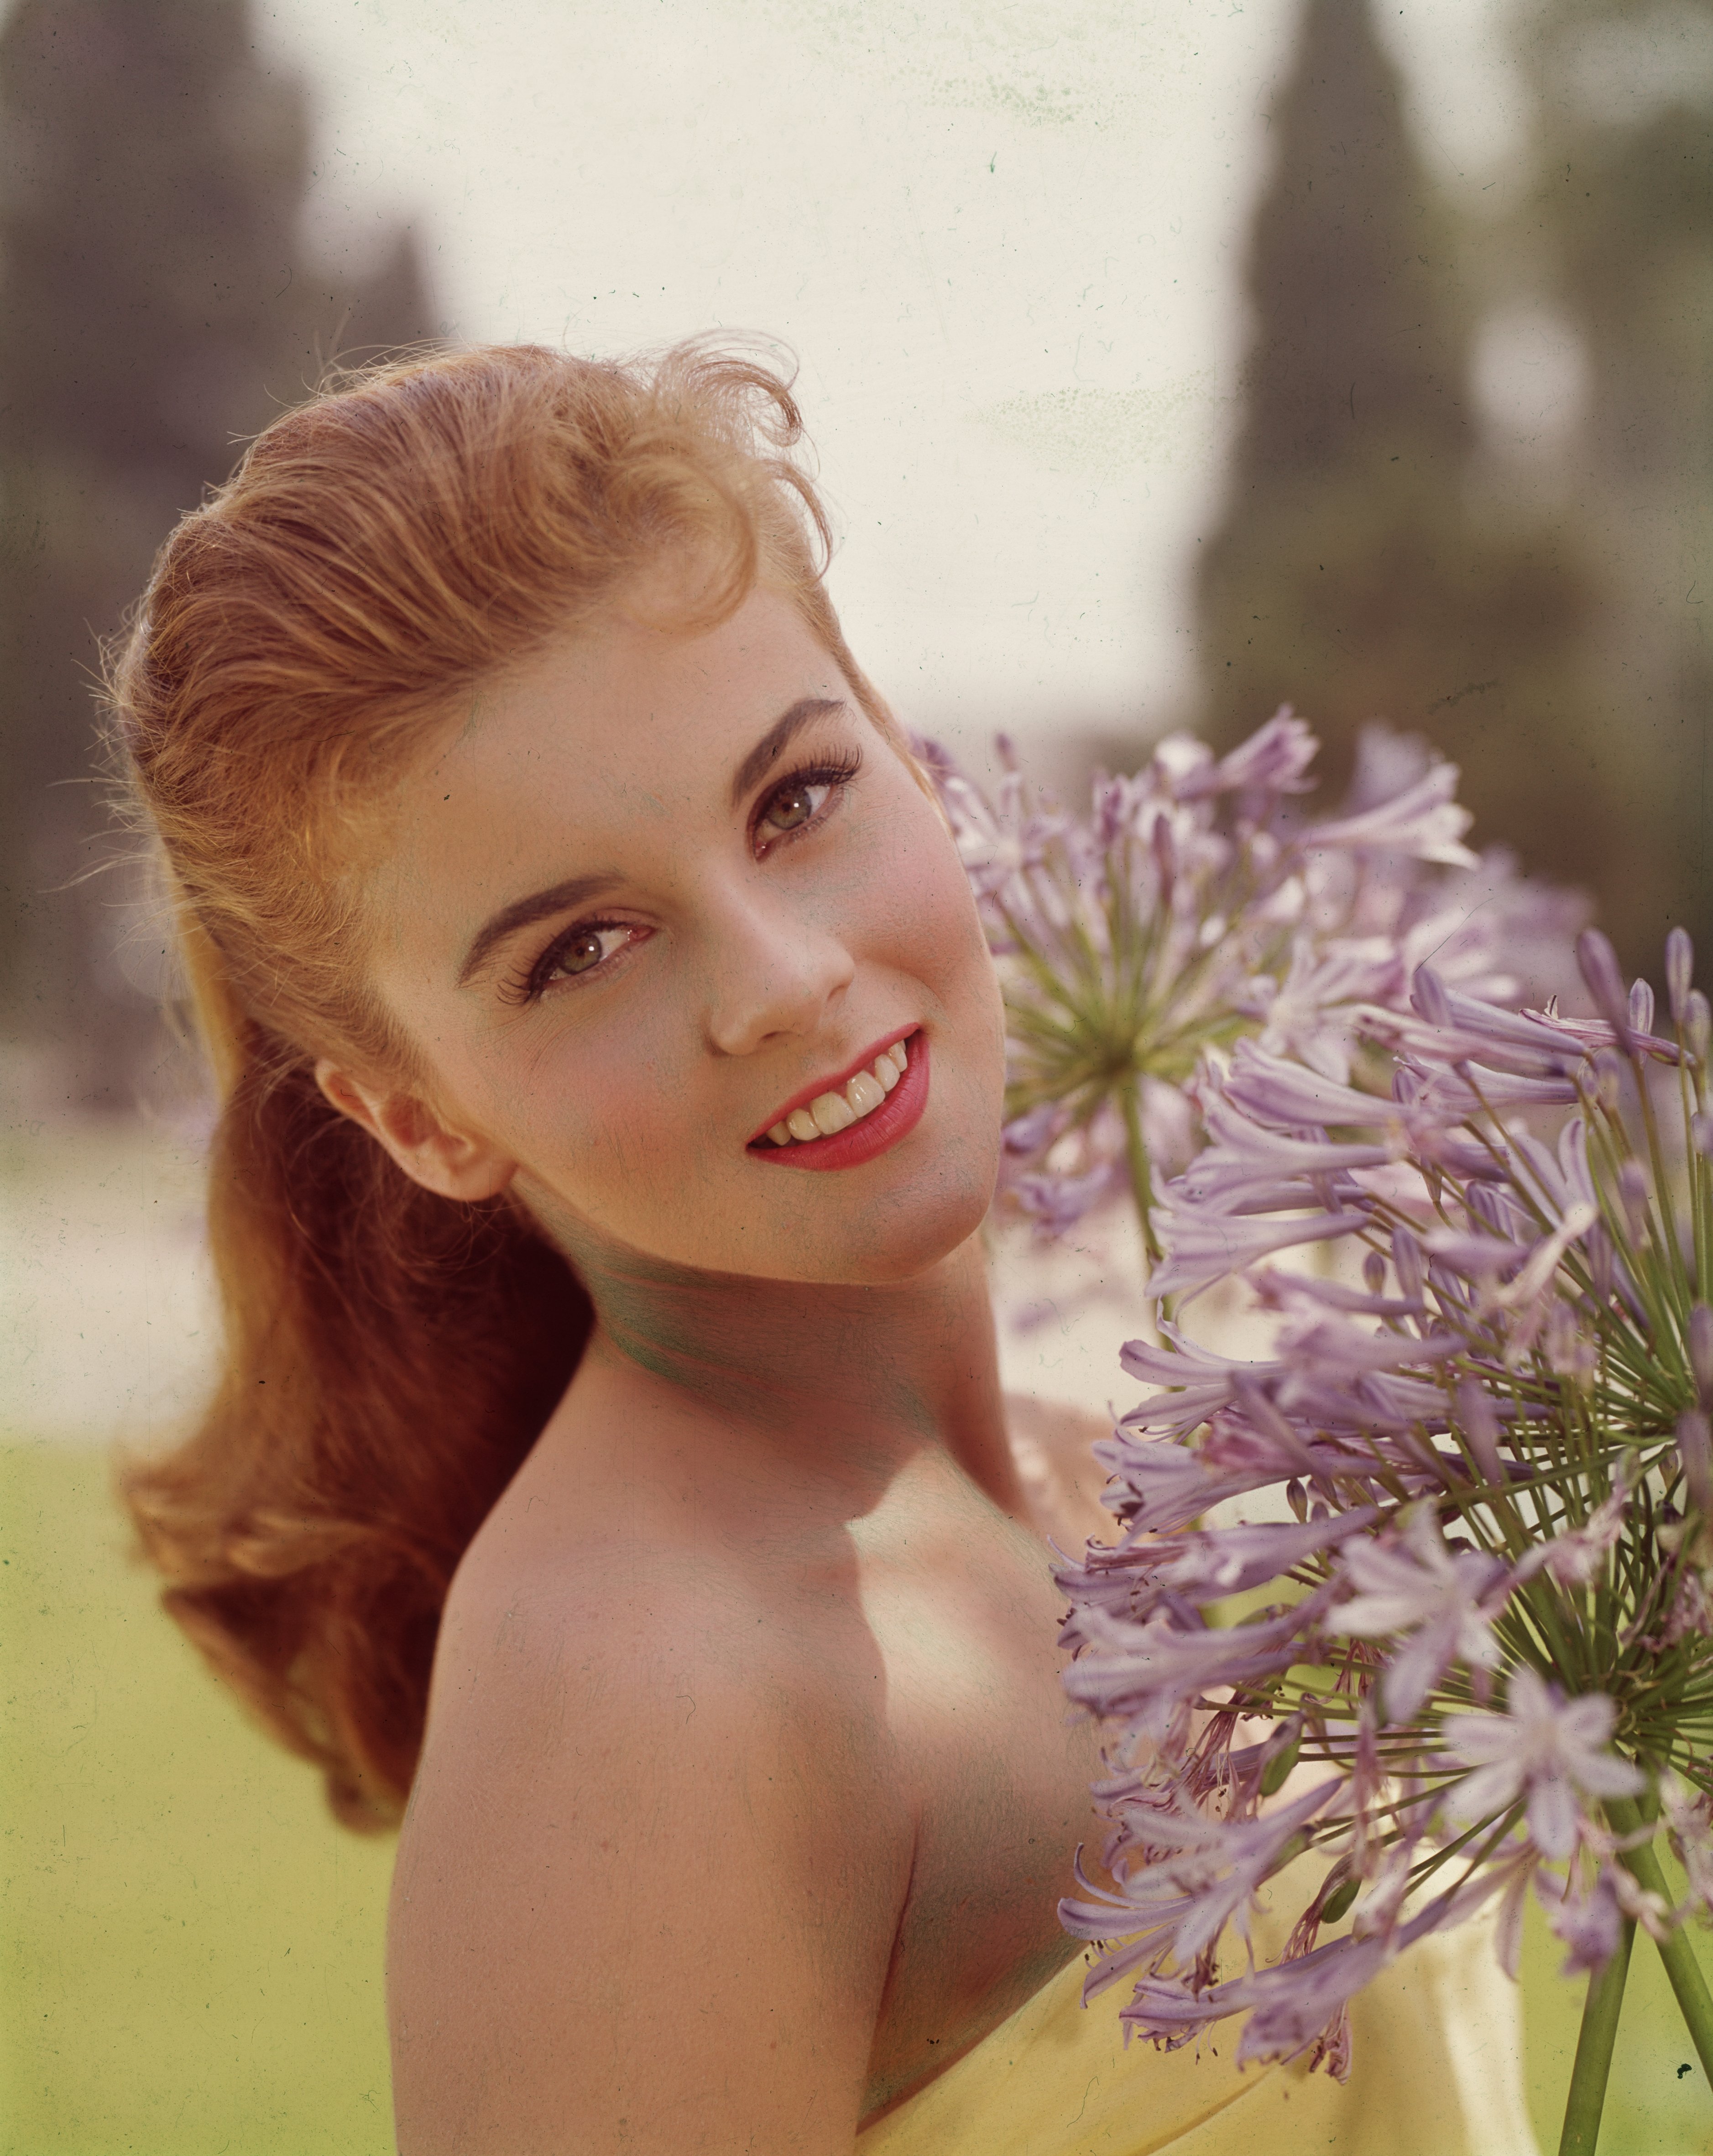 A portrait of actor Ann-Margret posing next to lavender flowers, circa 1960 | Source: Getty Images